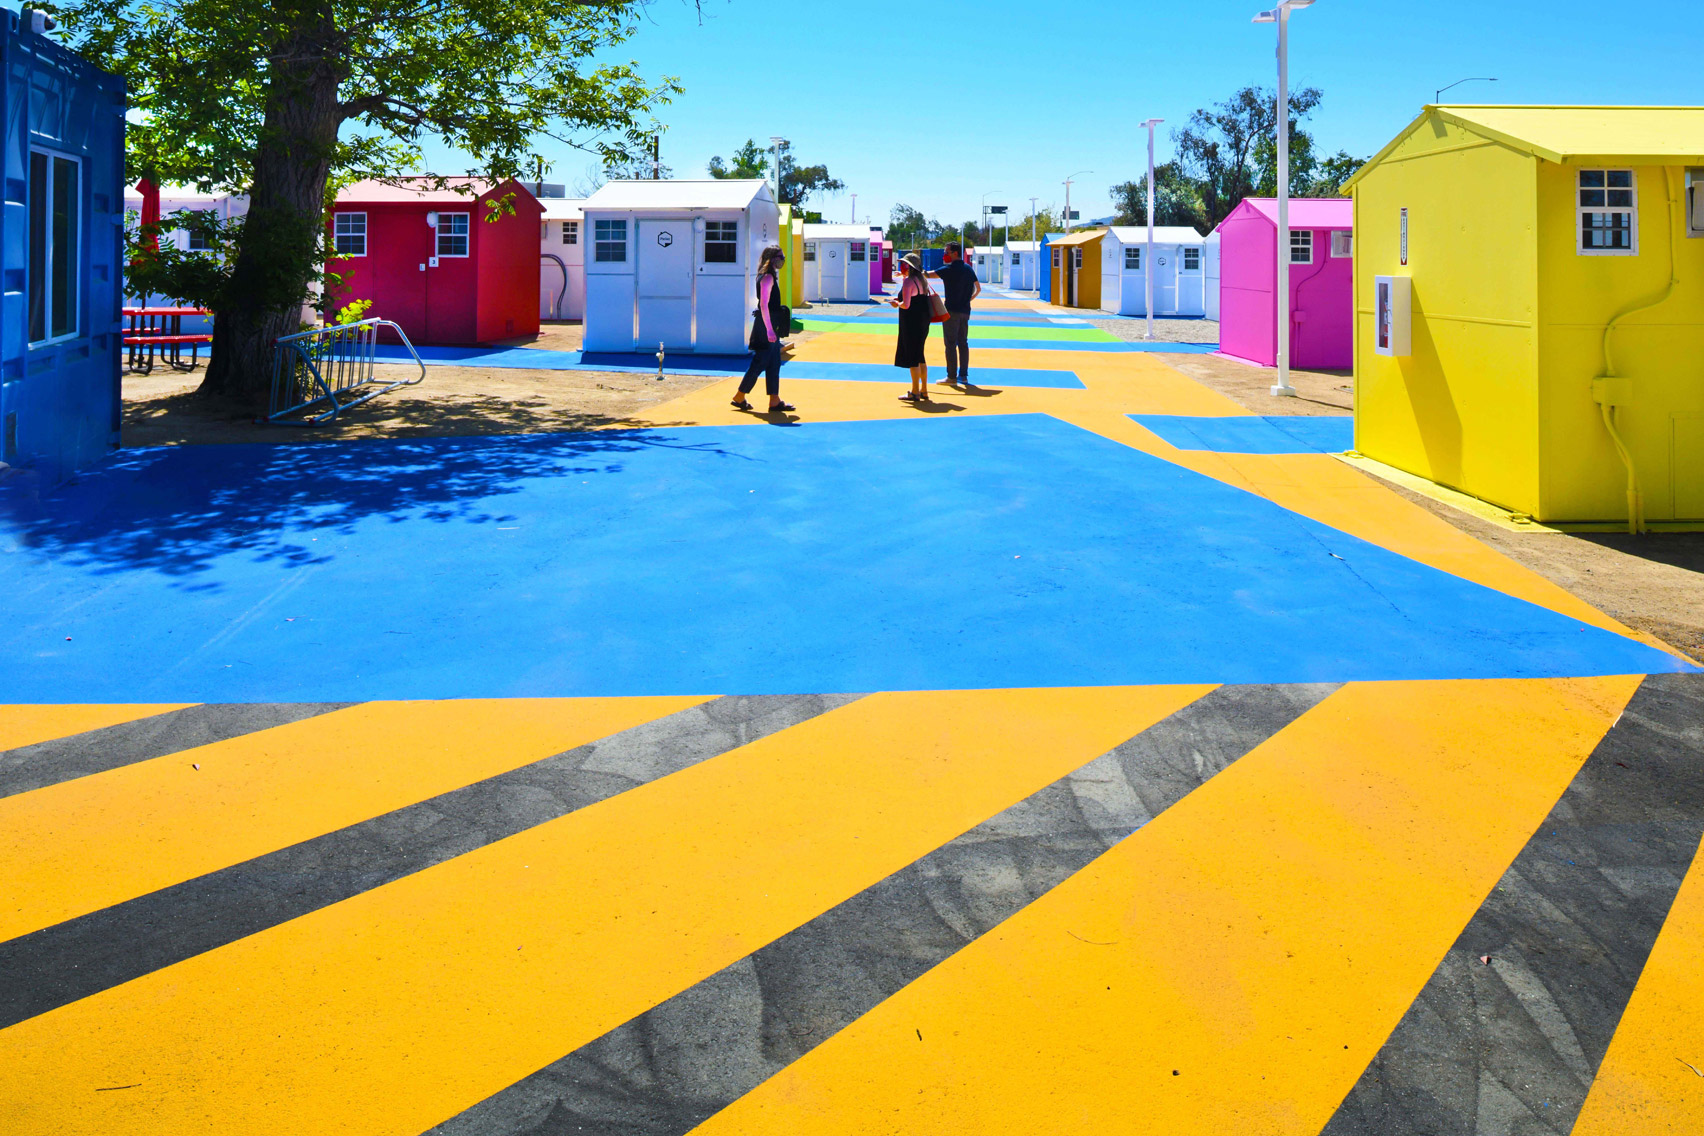 Brightly coloured asphalt in a homeless housing project in LA